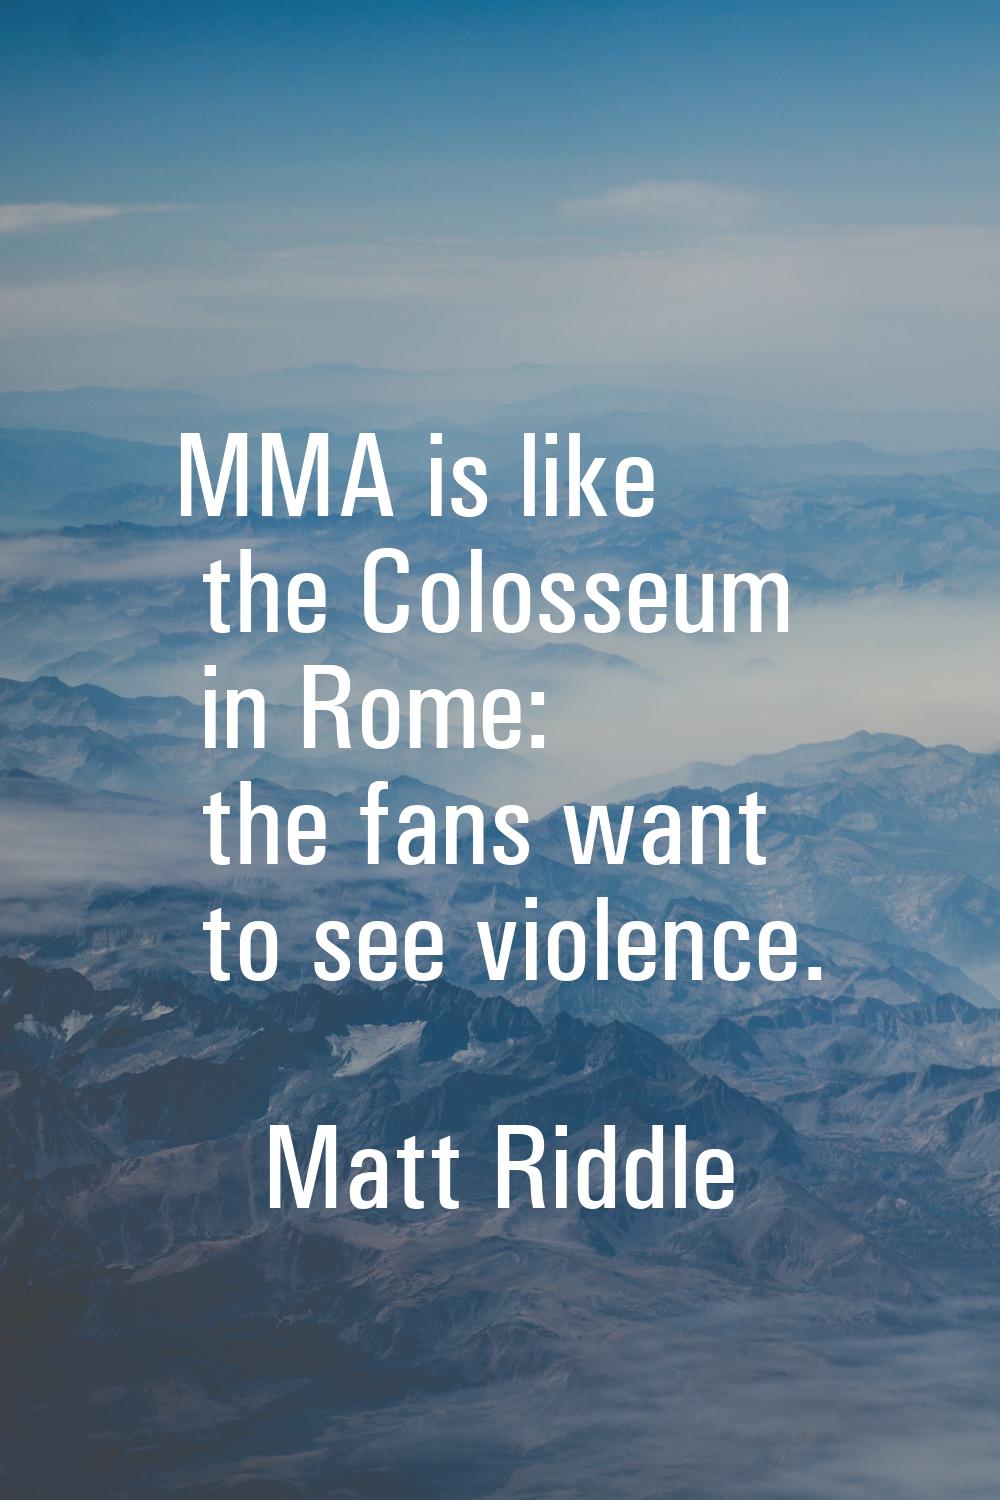 MMA is like the Colosseum in Rome: the fans want to see violence.